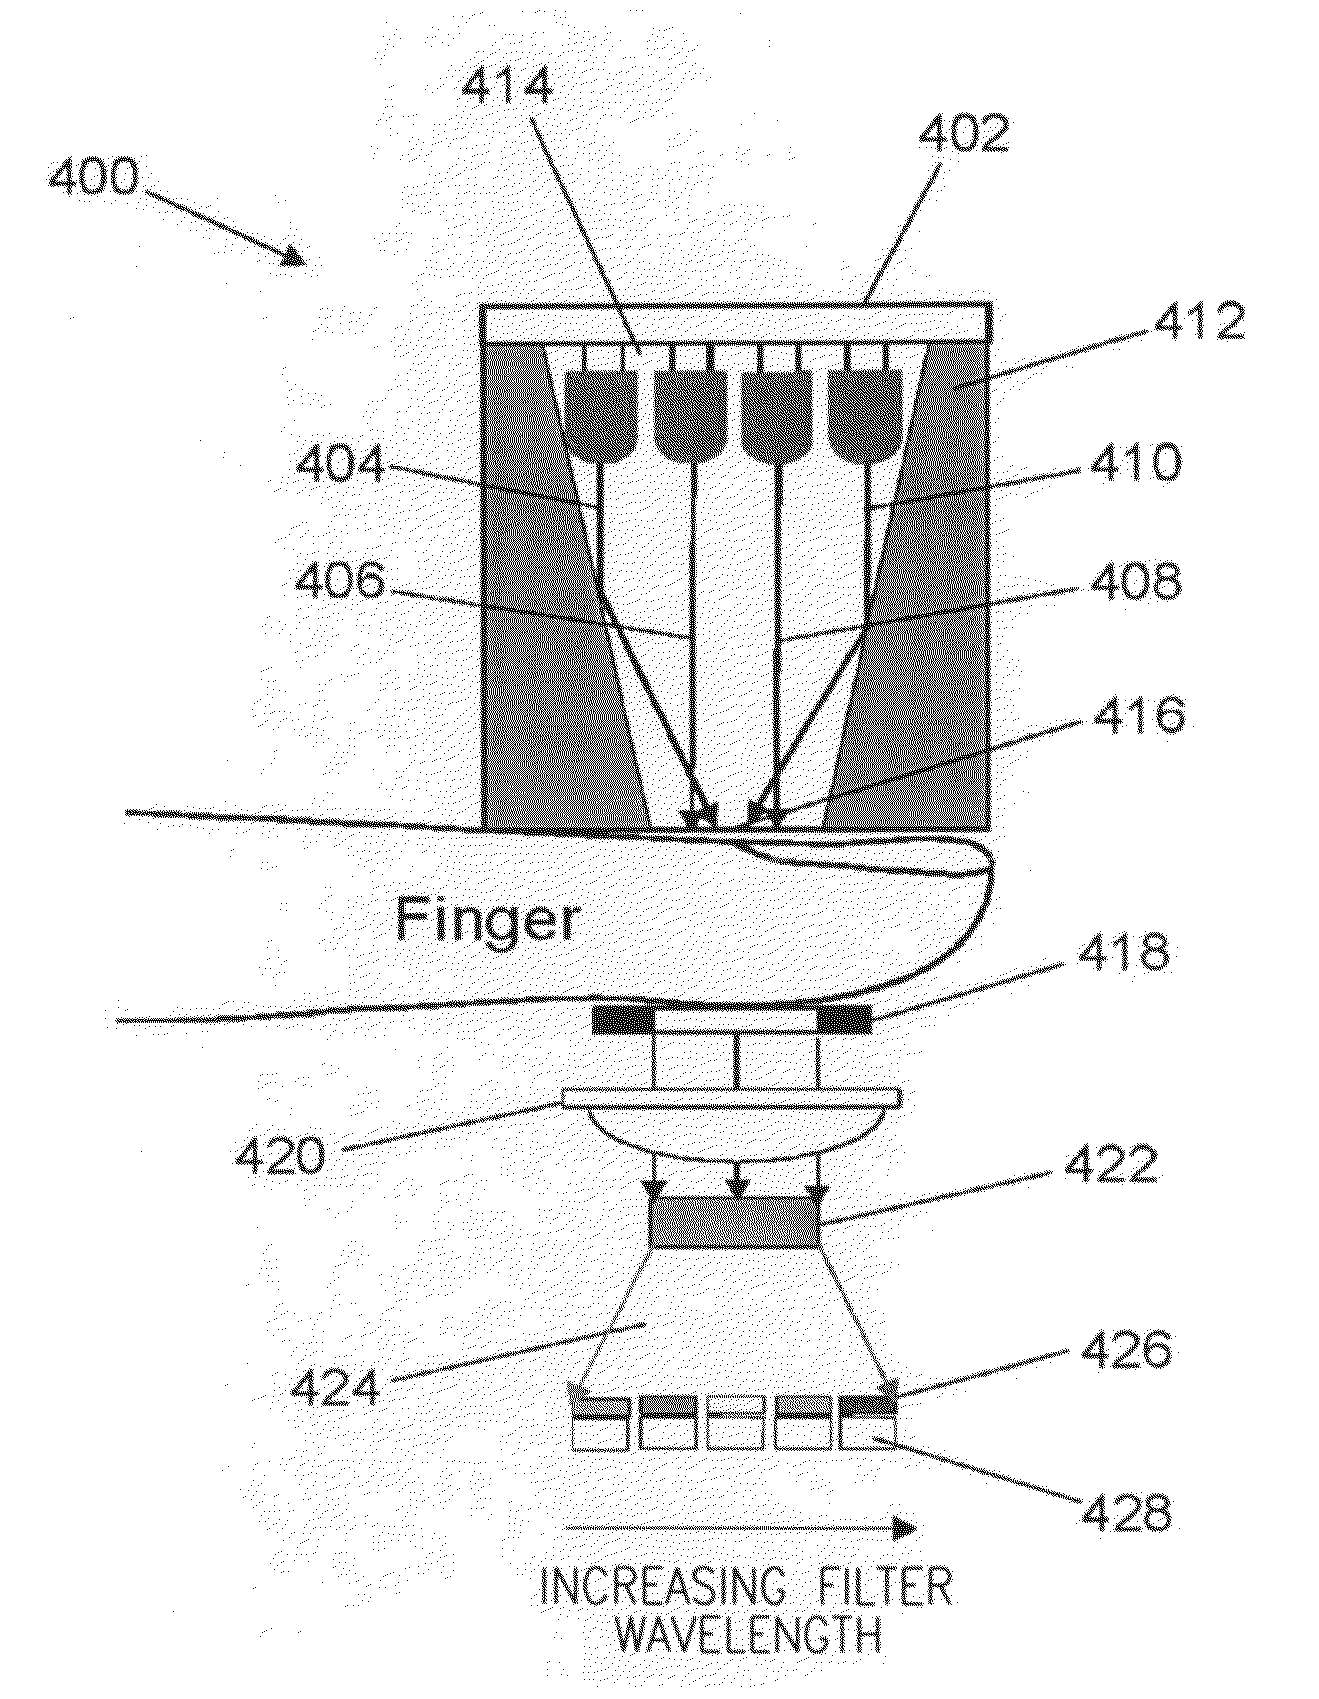 Optical device components